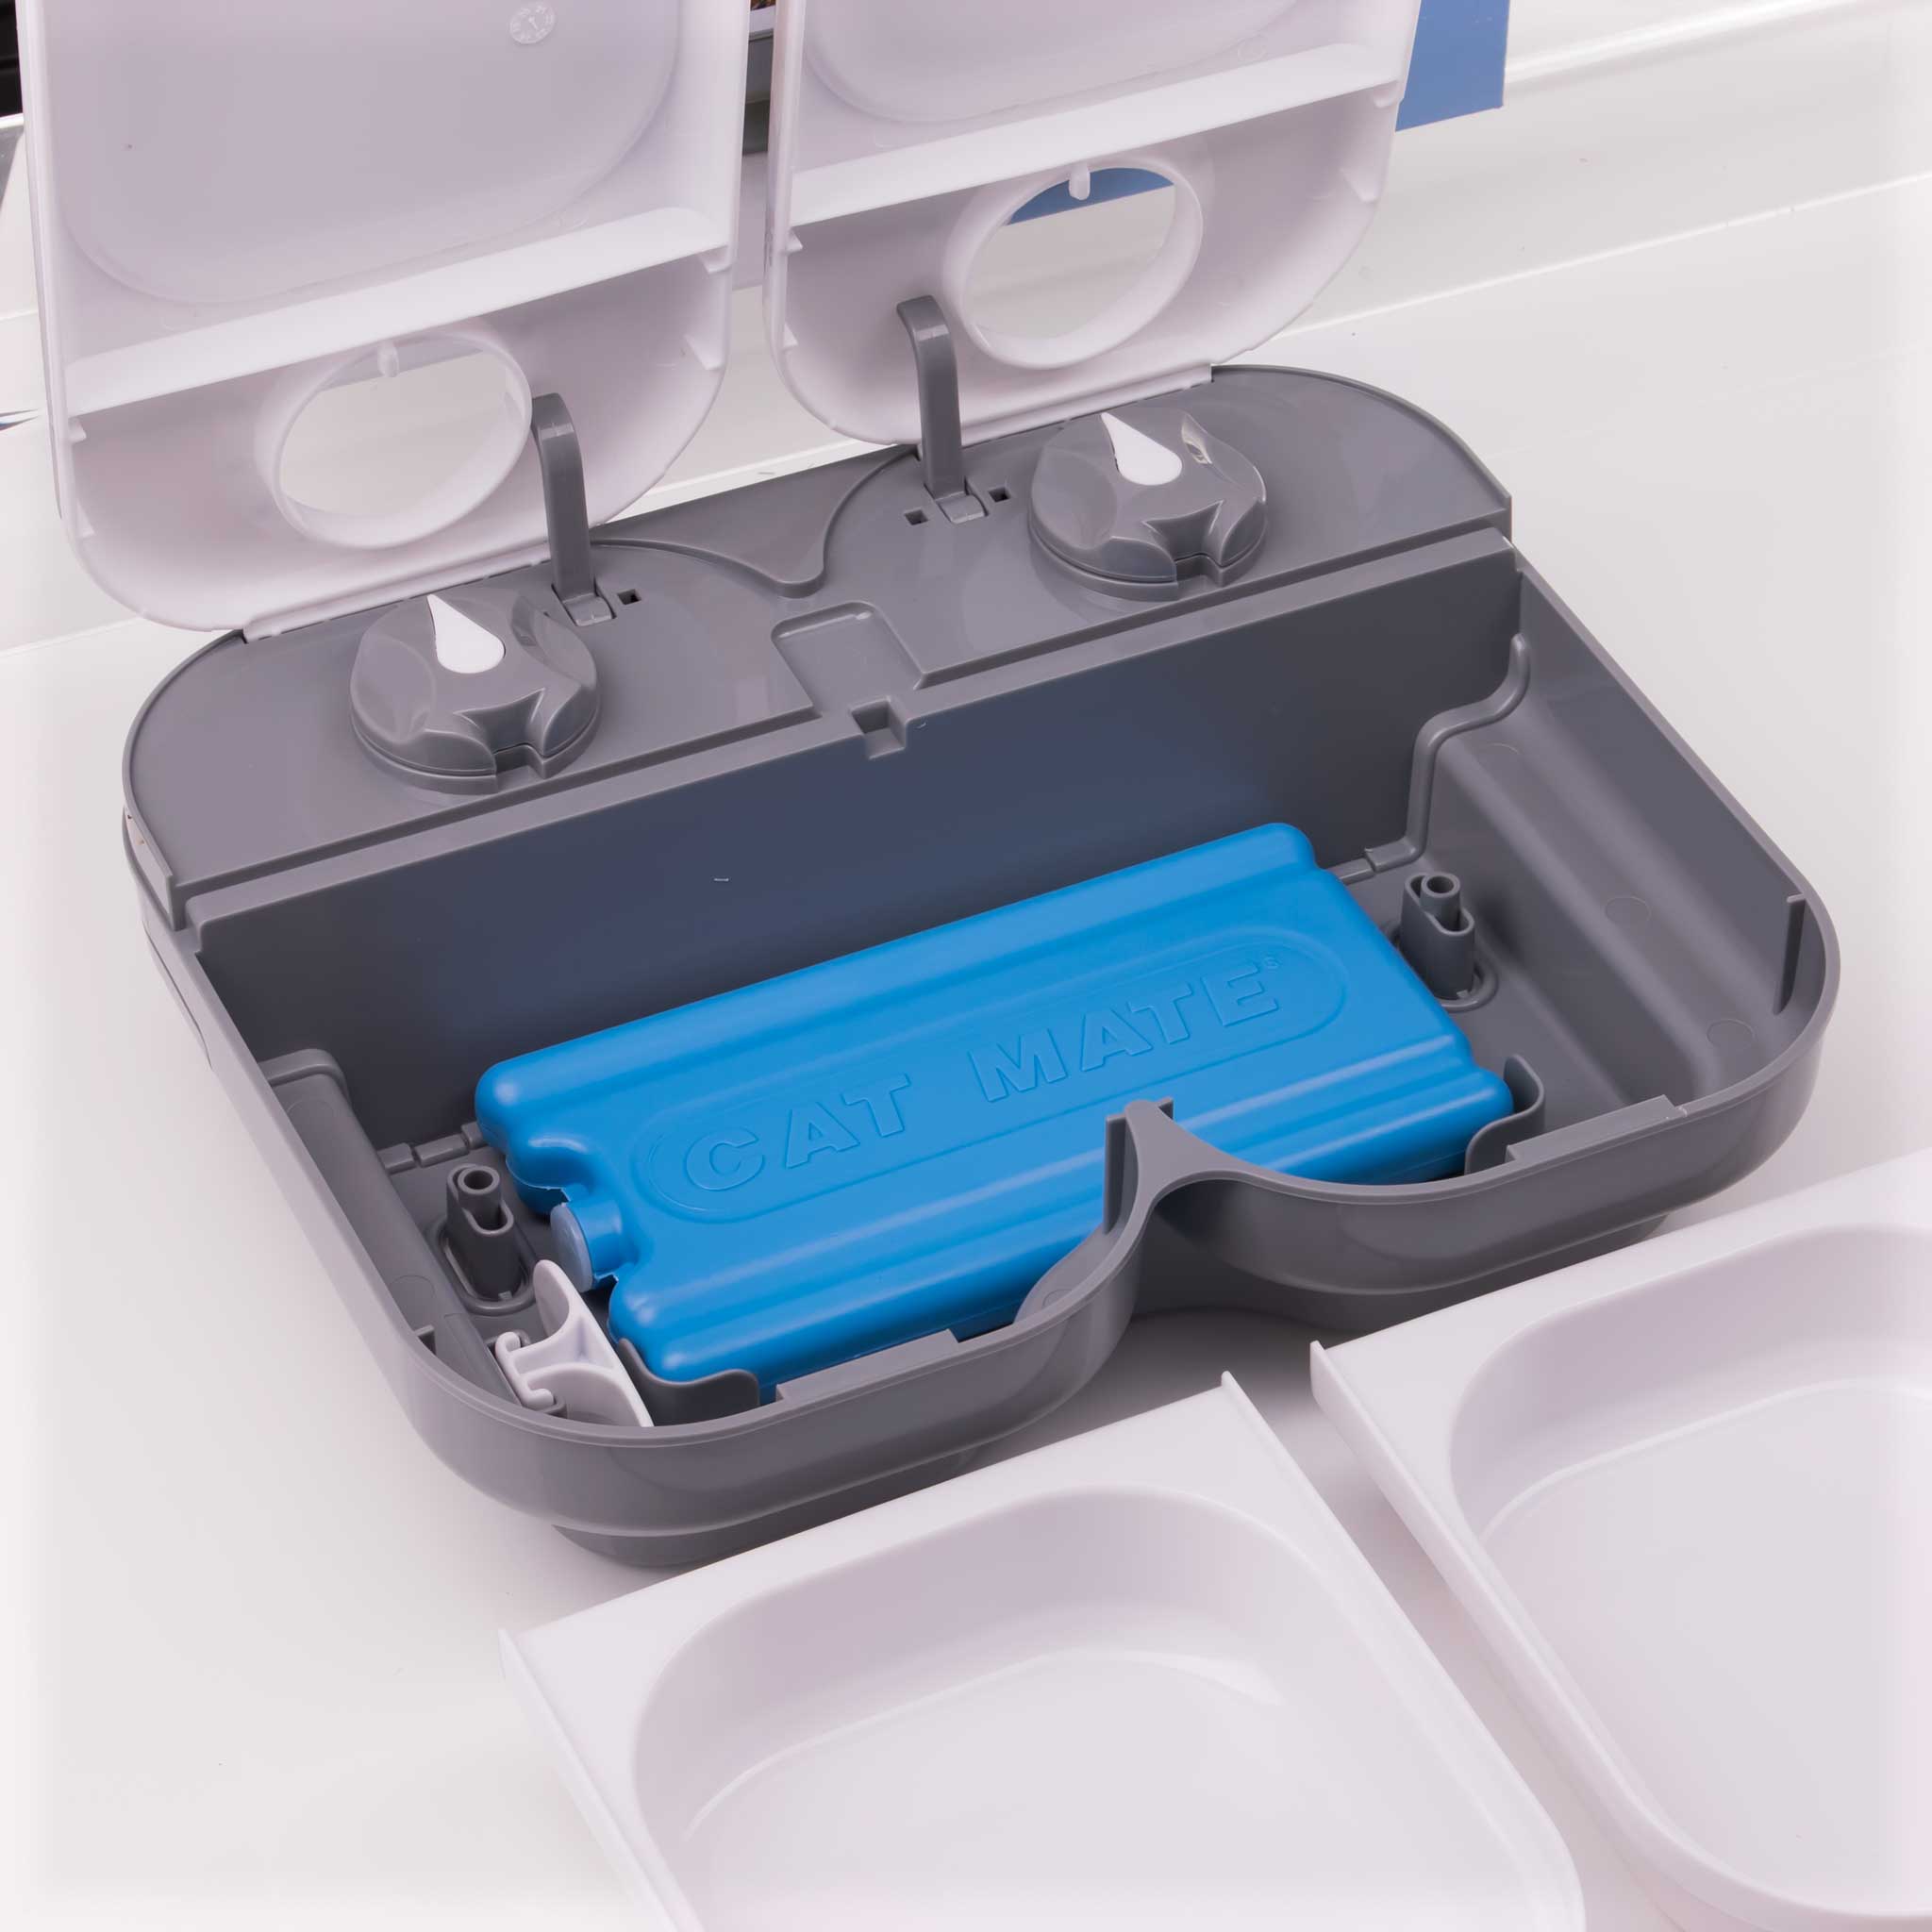 Simple to use ice pack sits under the feeding trays,